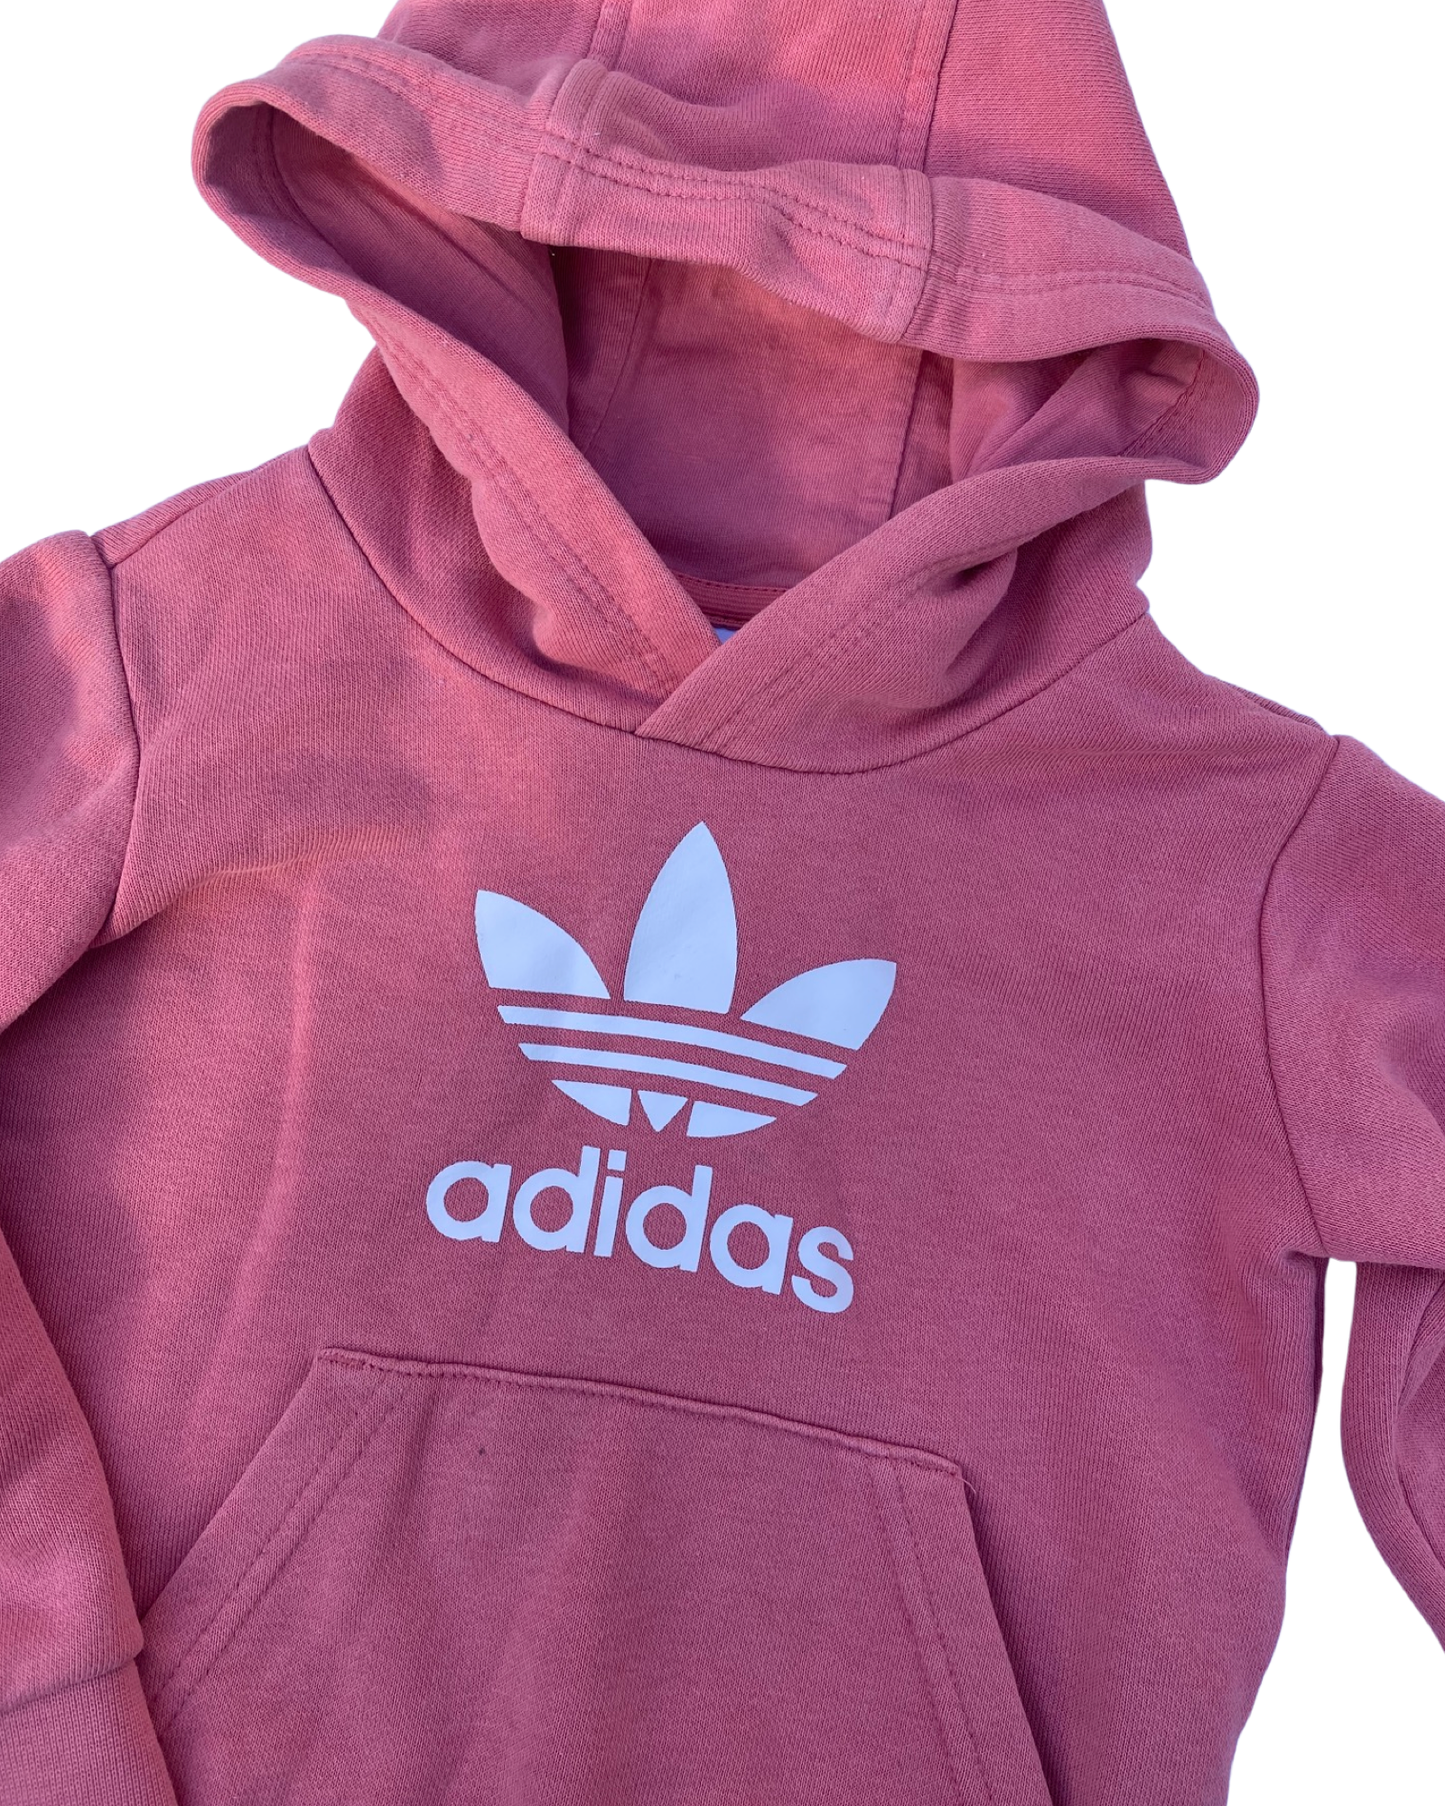 Adidas pink hoodie (size 12-18mths)